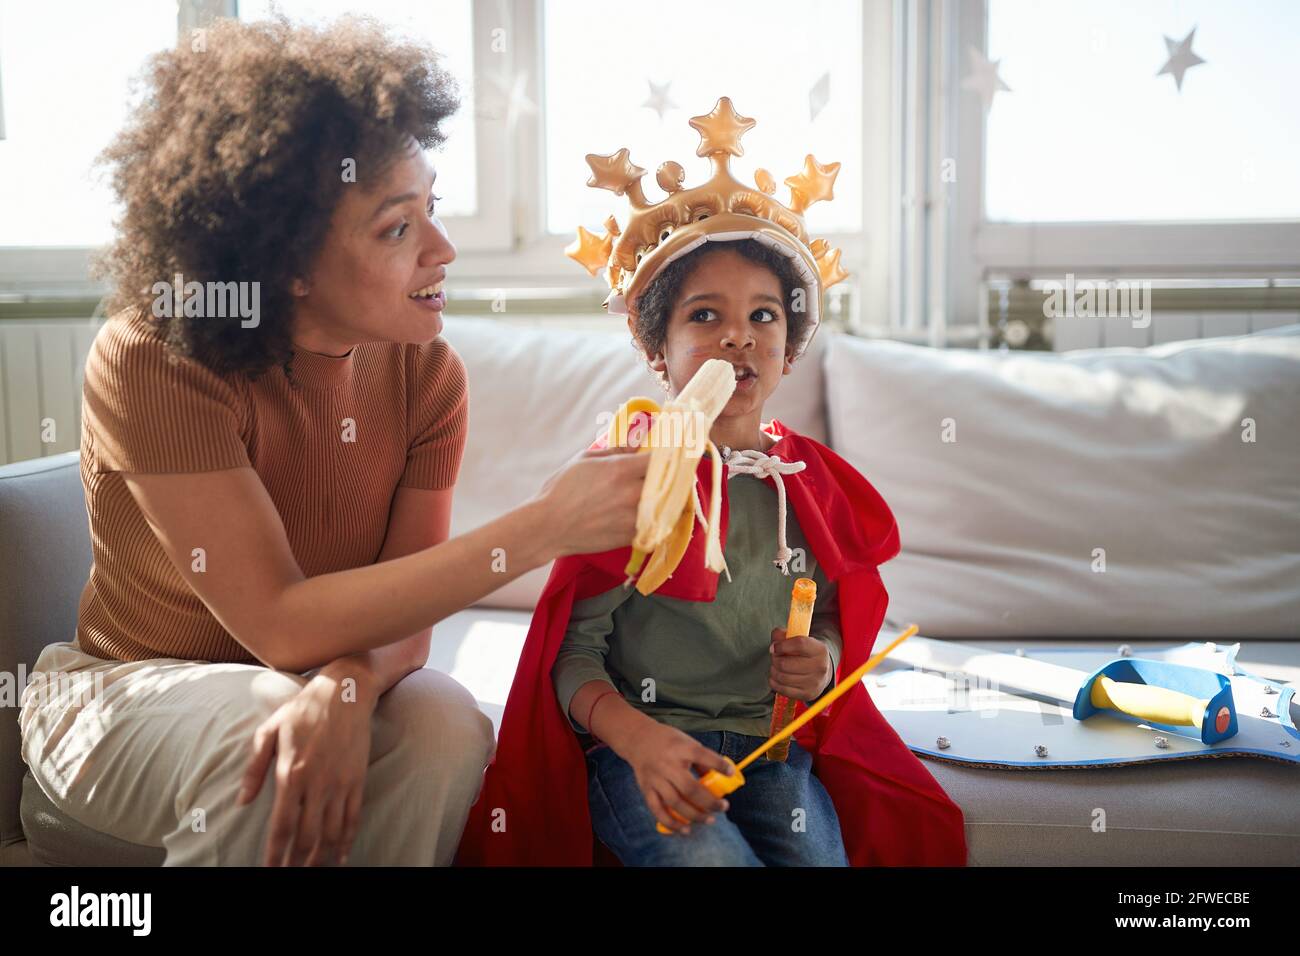 A young Mom is feeding her little son with the banana while playing in a relaxed atmosphere at home together. Family, together, love, playtime Stock Photo